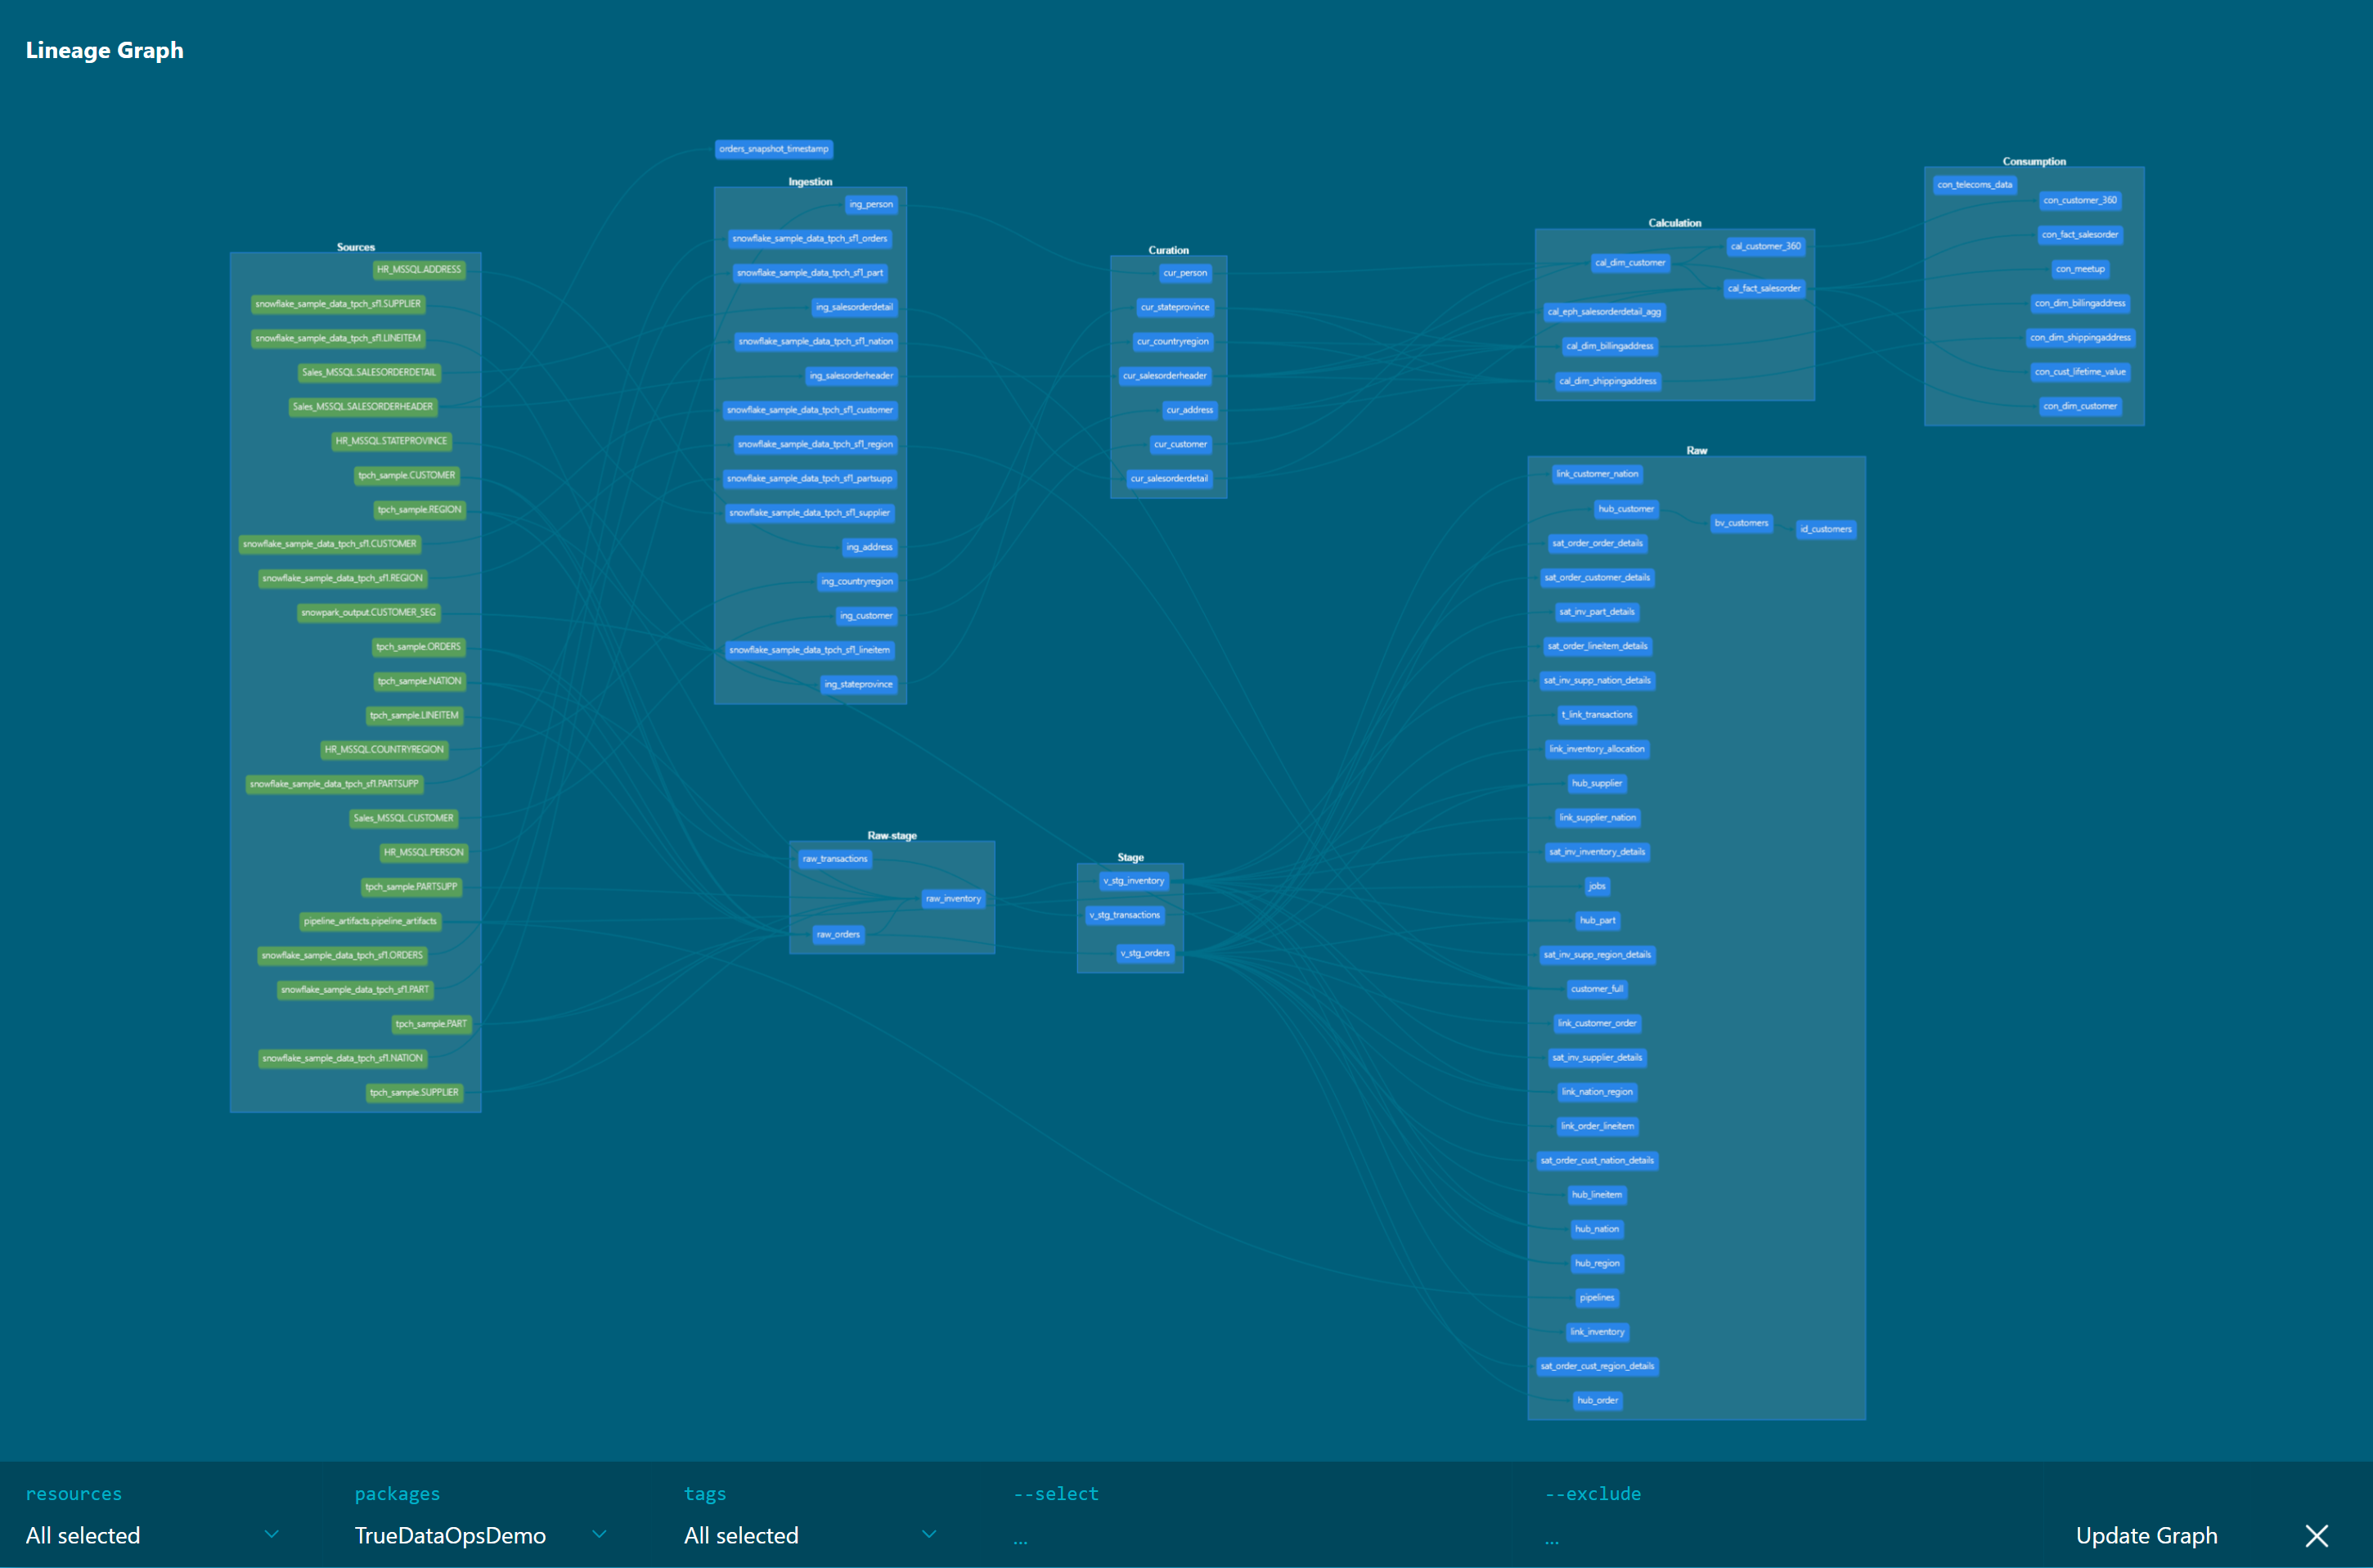 grouped and labled data lineage graph by logical stages __shadow__